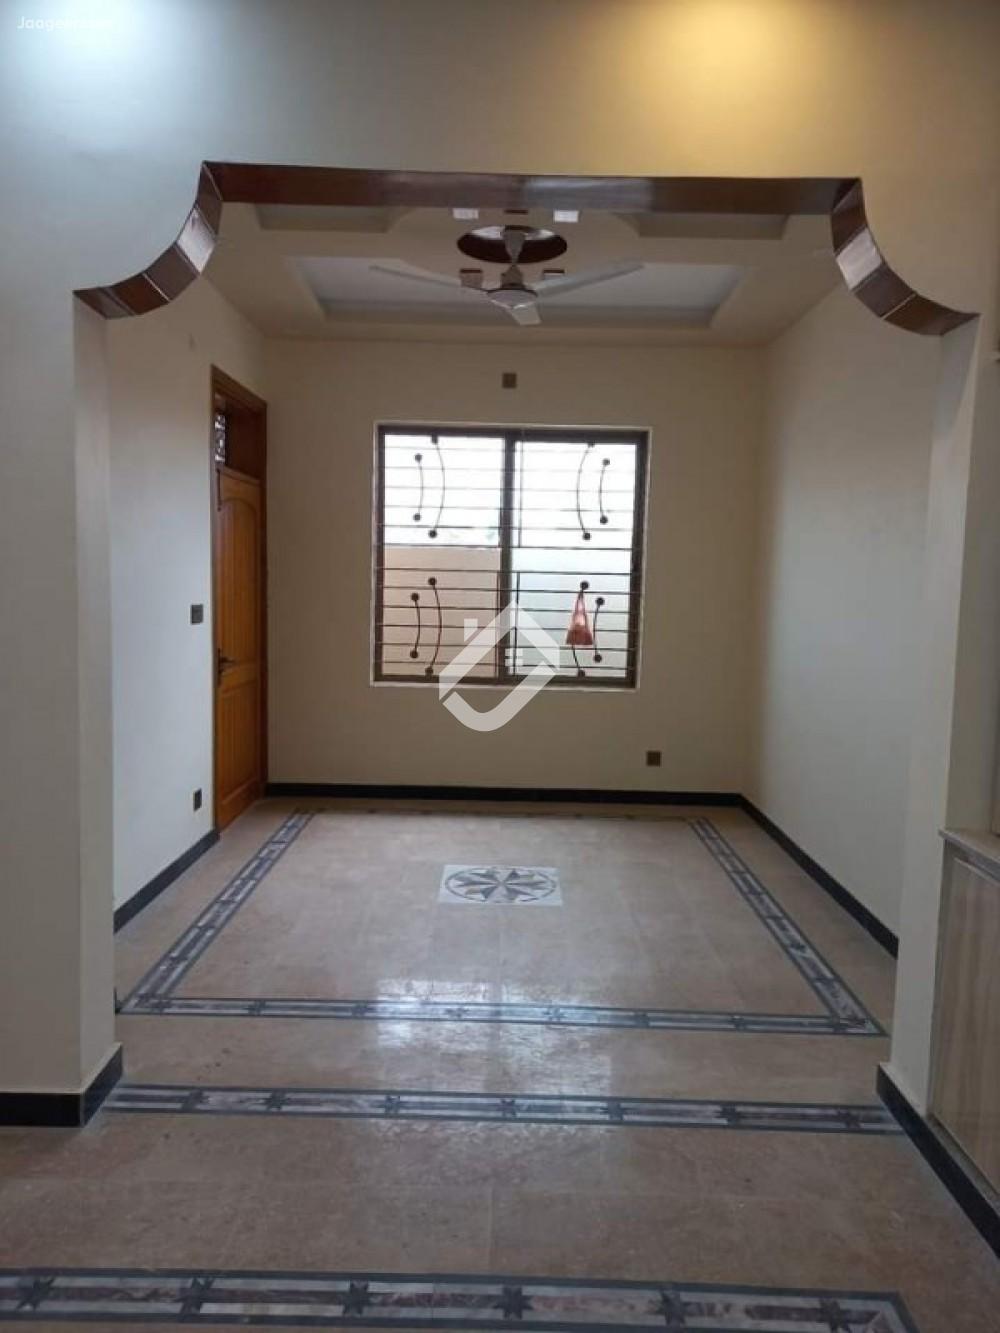 View  5 Marla Double Storey House For Sale At Prince Road in Prince Road, Islamabad